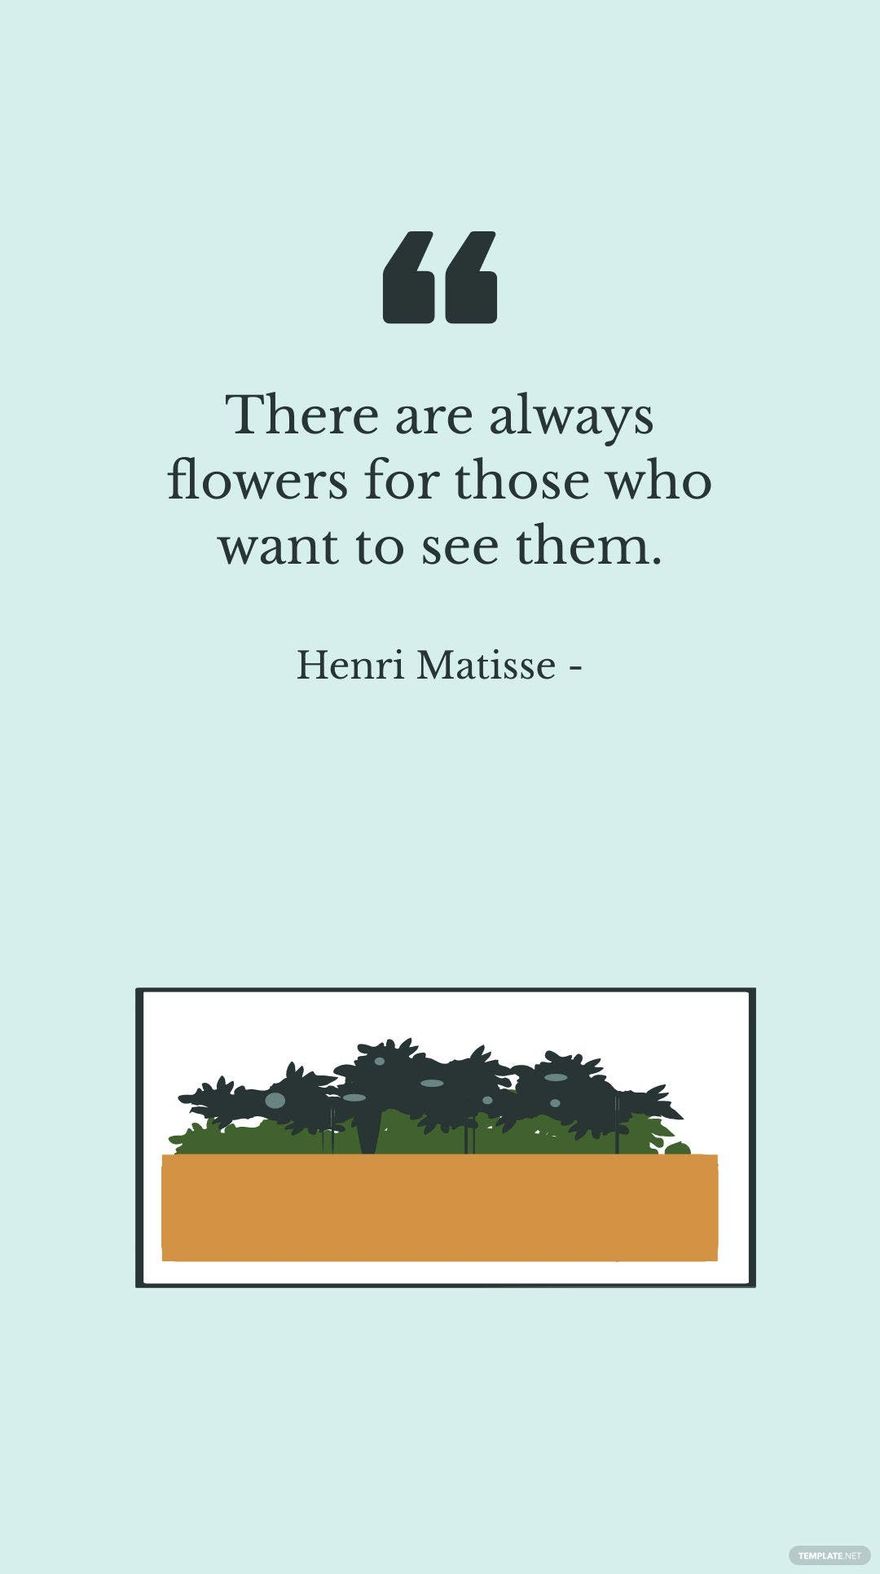 Henri Matisse - There are always flowers for those who want to see them.